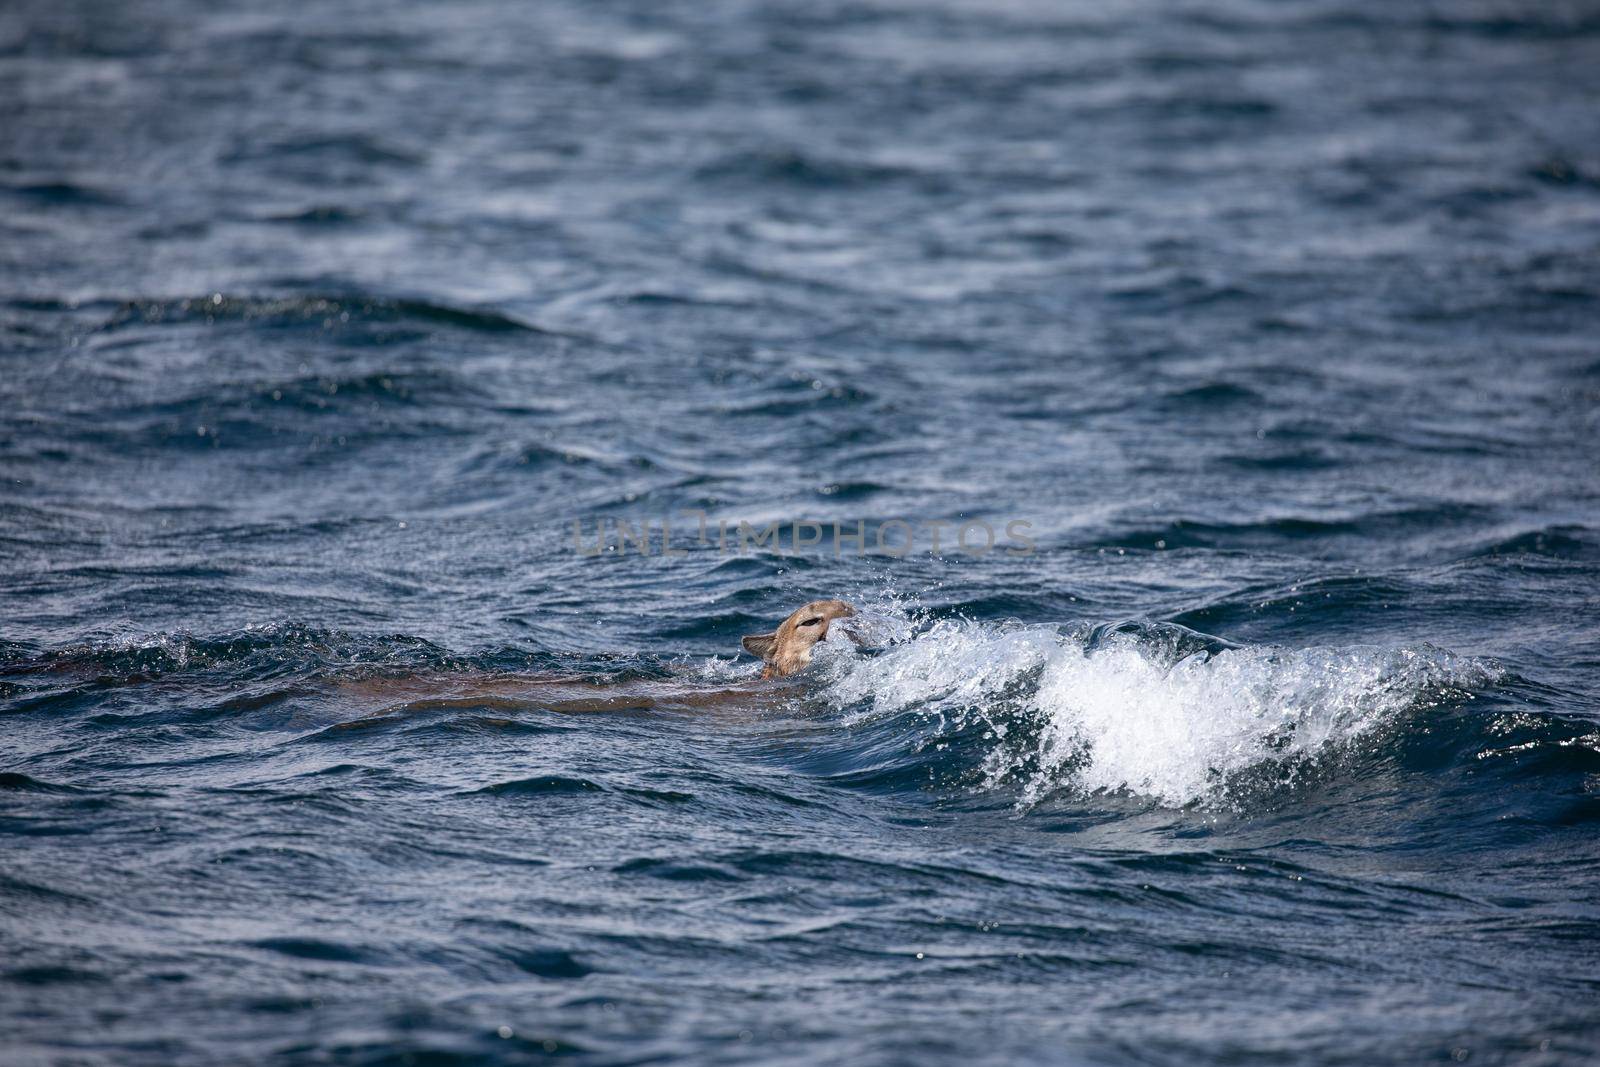 A cougar or mountain lion being hit by a wave as it is trying to swim across a channel by Granchinho